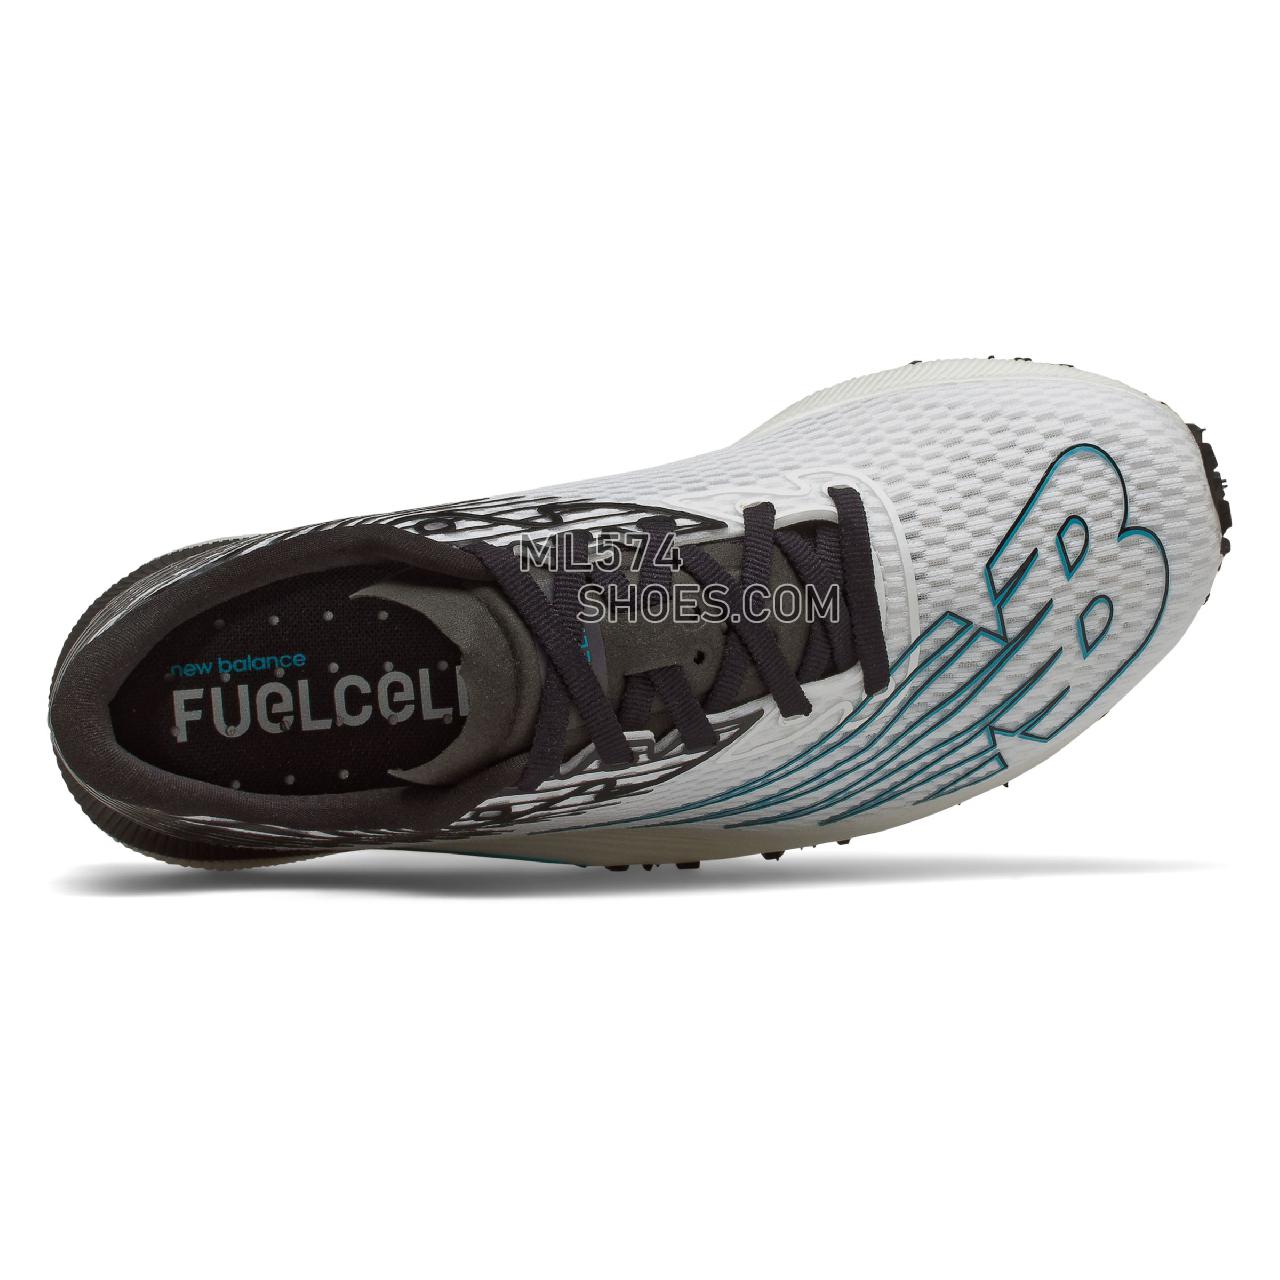 New Balance FuelCell RC Elite - Women's Track Spikes And Cross Country - White with Black and Virtual Sky - WRCELWB